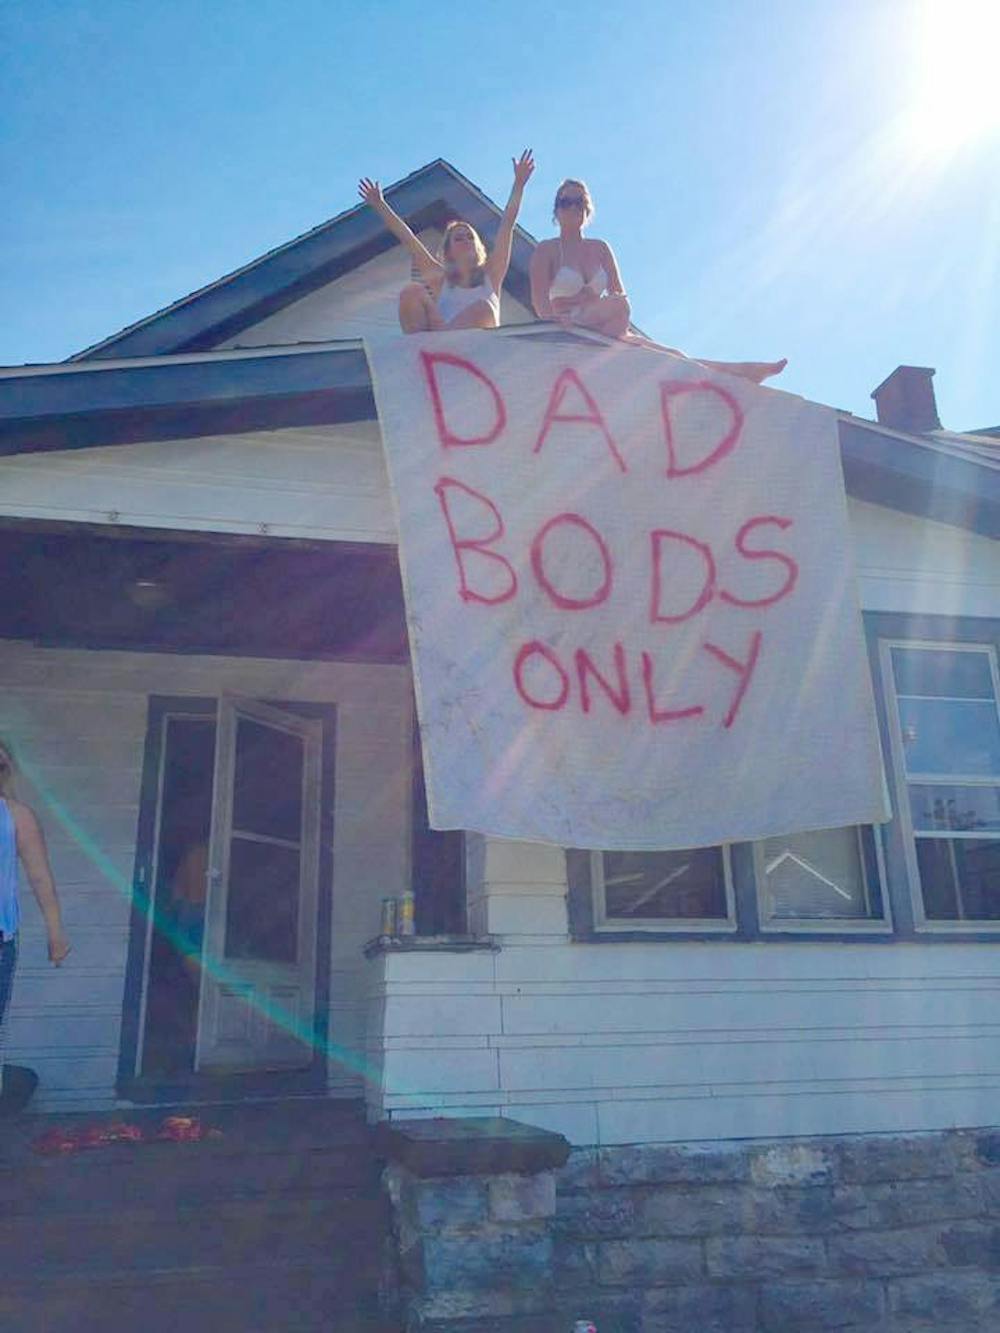 <p>Dad bods, the new trend of being adorably unfit, have taken over college campuses. Women are drooling over men with bellies while men proudly show of their lack of fitness.</p>